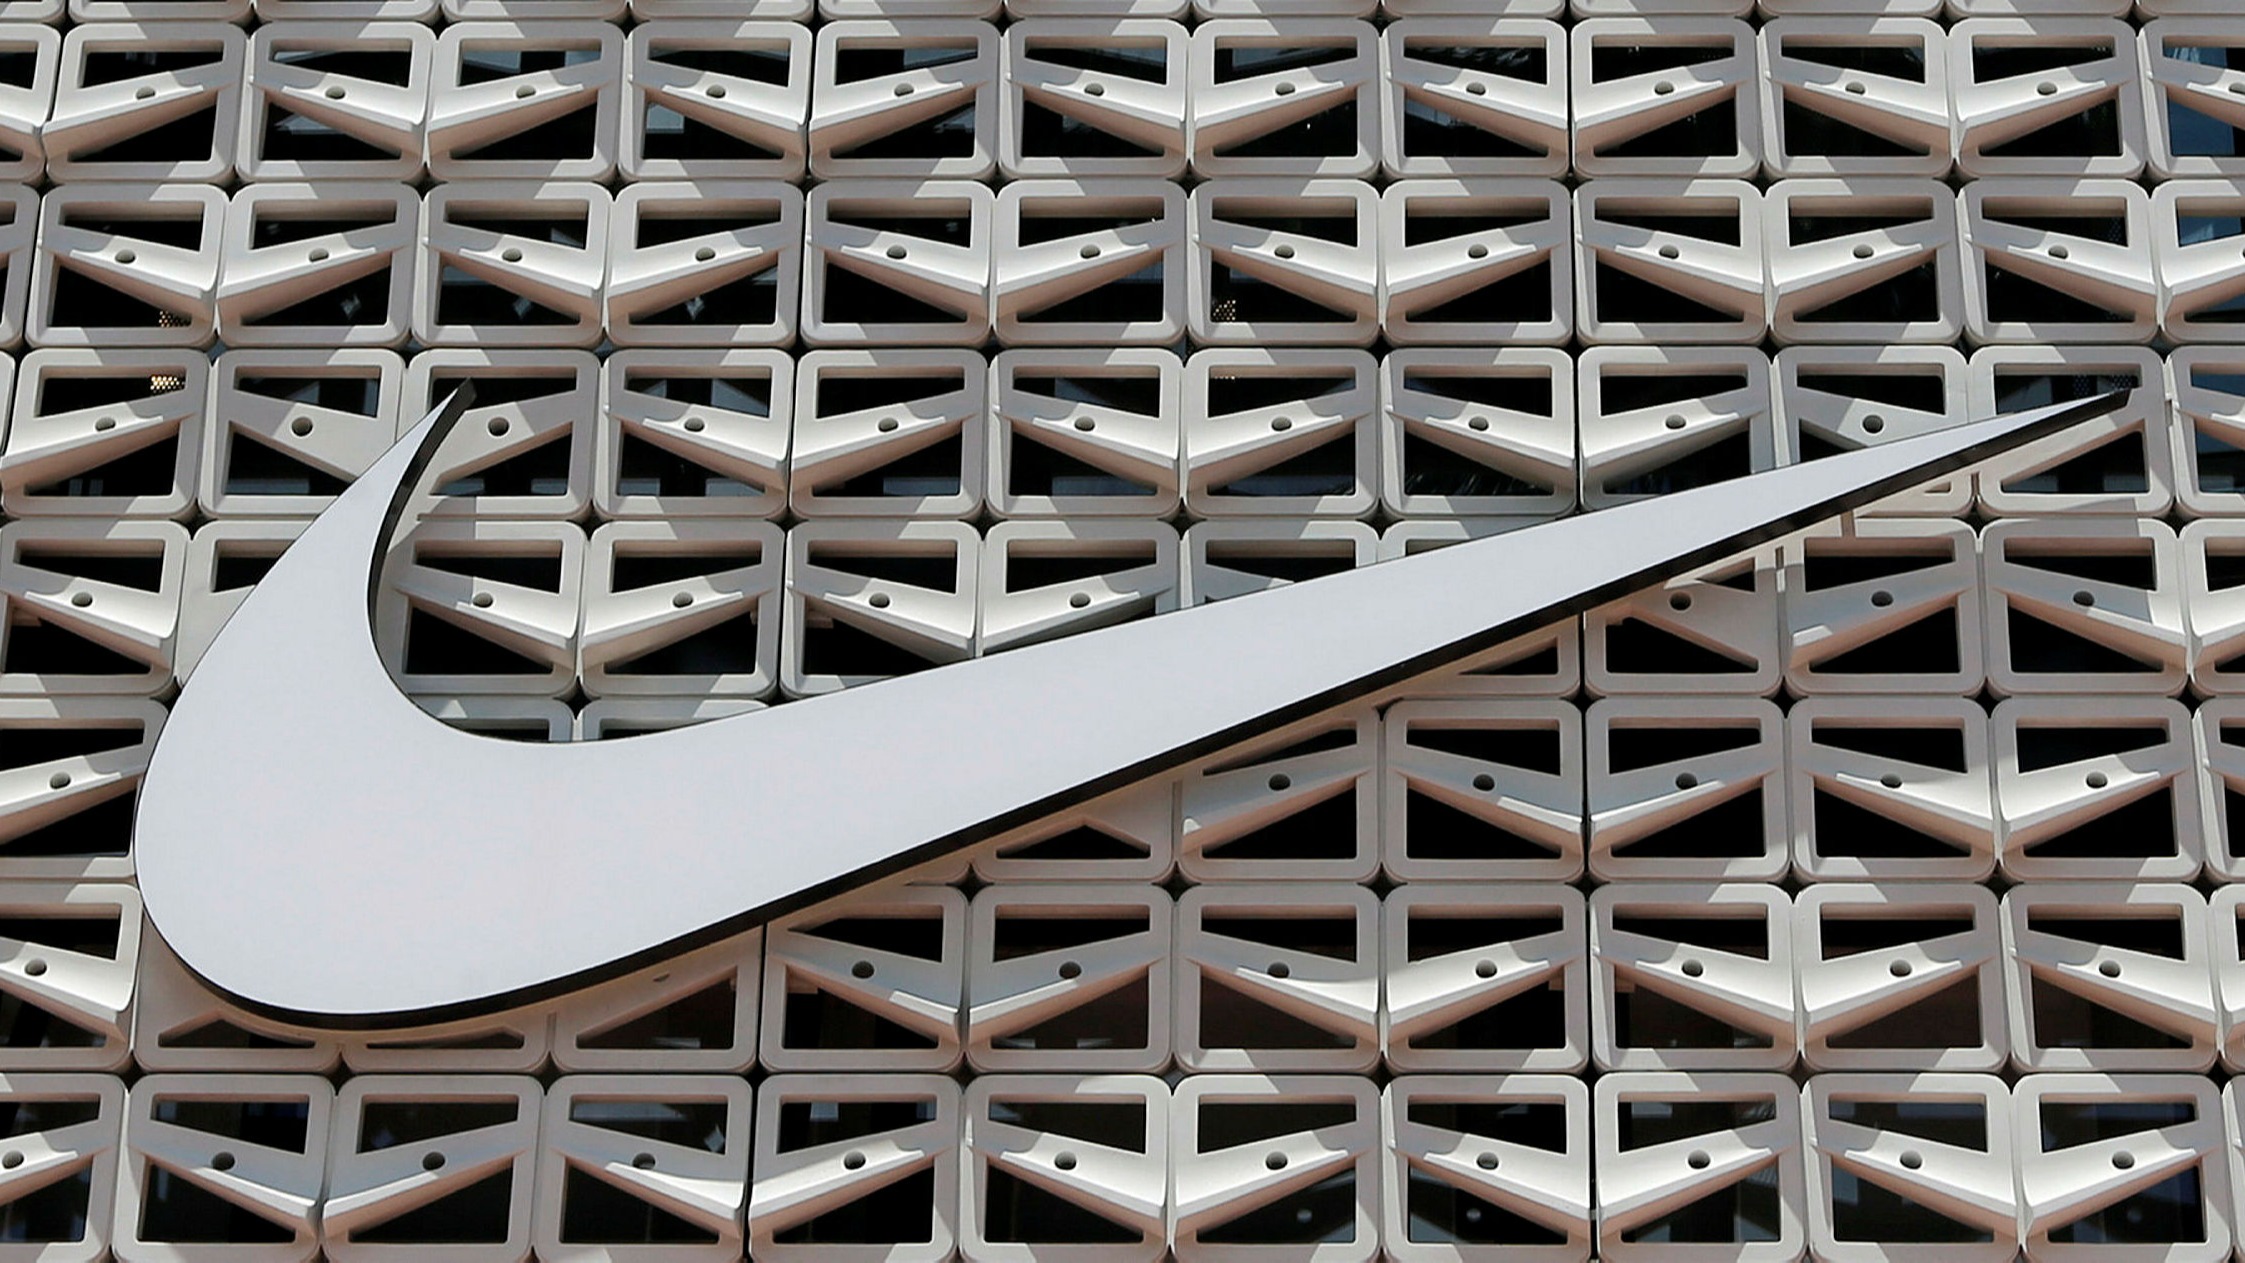 Nike's diversity head to leave after two years | Financial Times